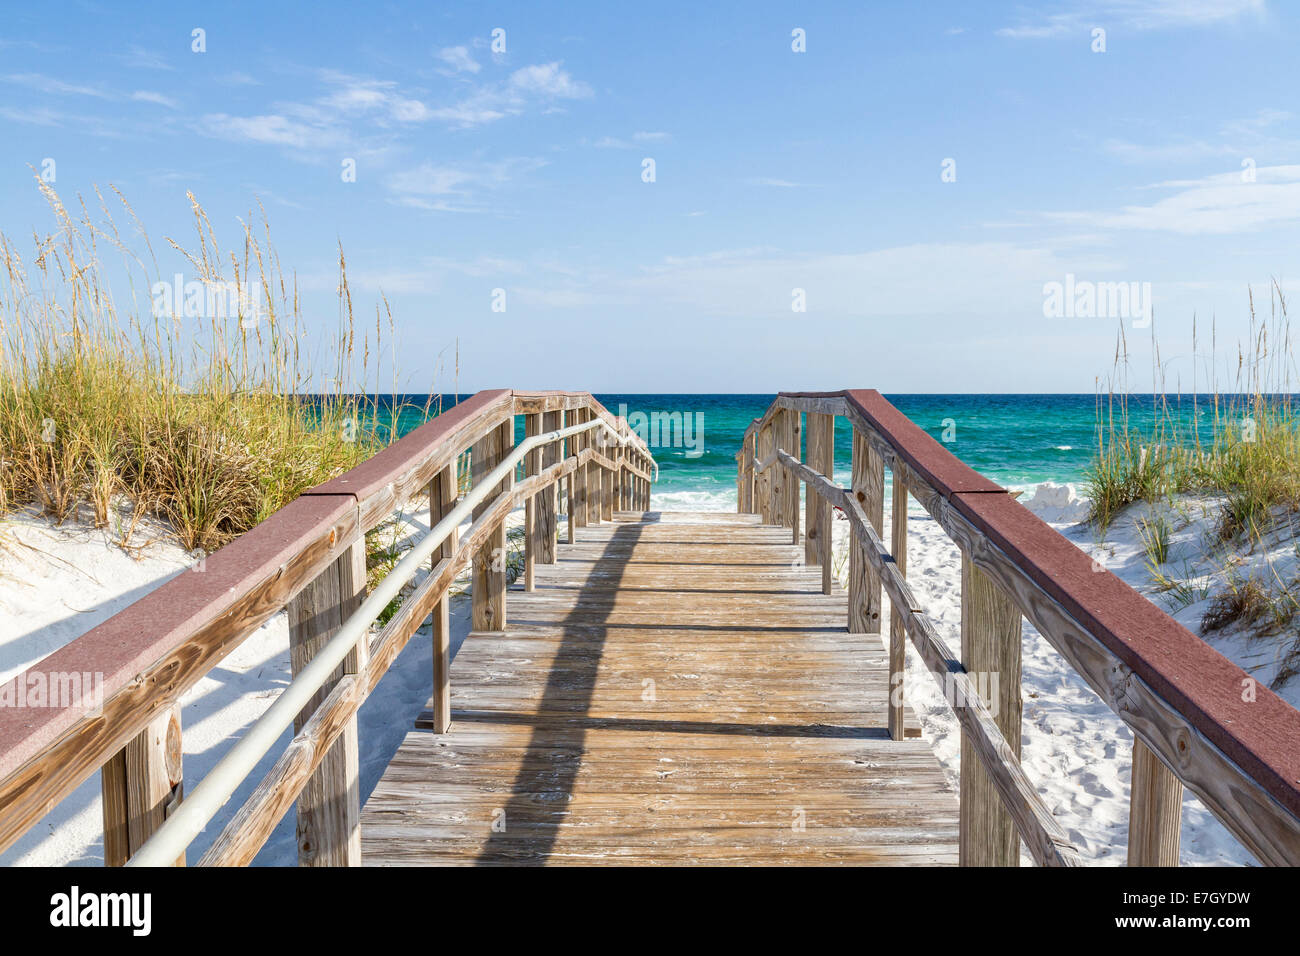 The boardwalk leads to the turquoise waters of the Gulf of Mexico at Park West on the western end of Pensacola Beach, Florida. Stock Photo